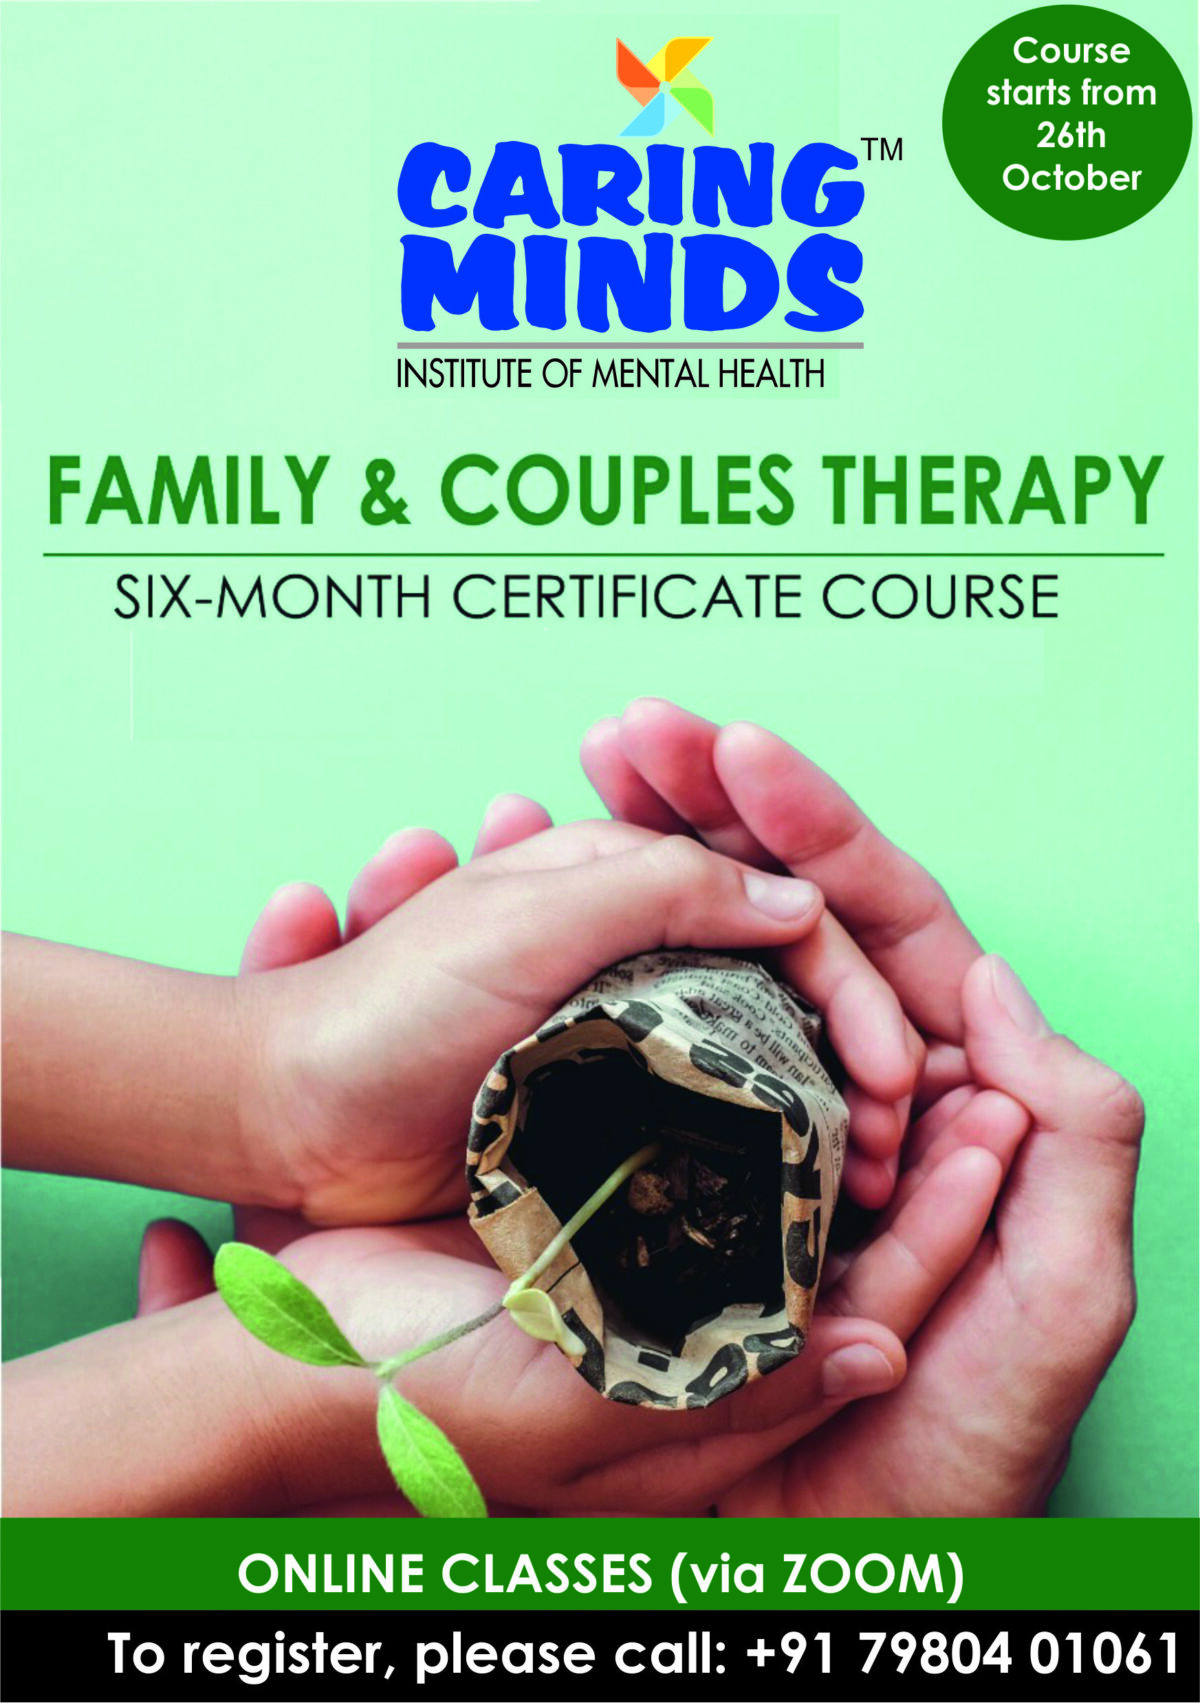 Familiy & Couples Therapy Course